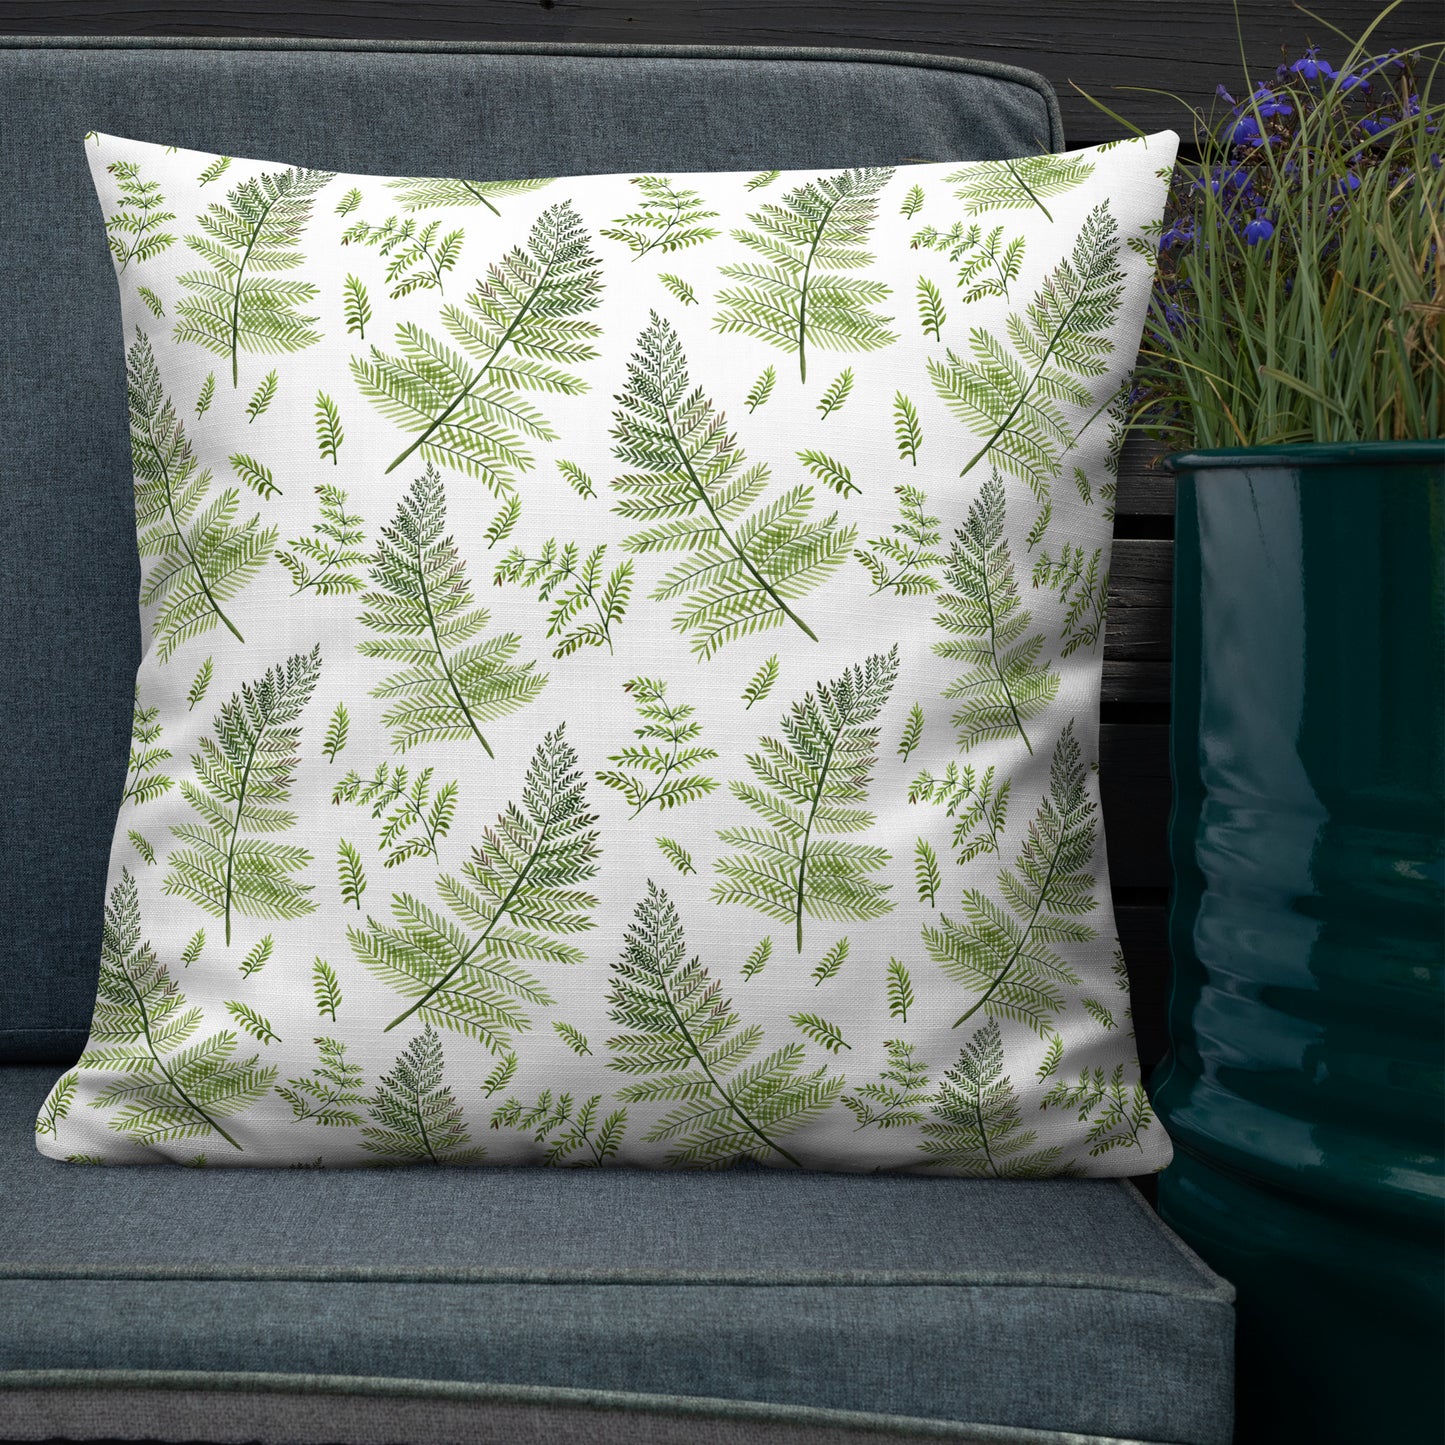 Decorative cushion 'fern leaves' with botanical illustrations | 45x45cm | with hidden zipper